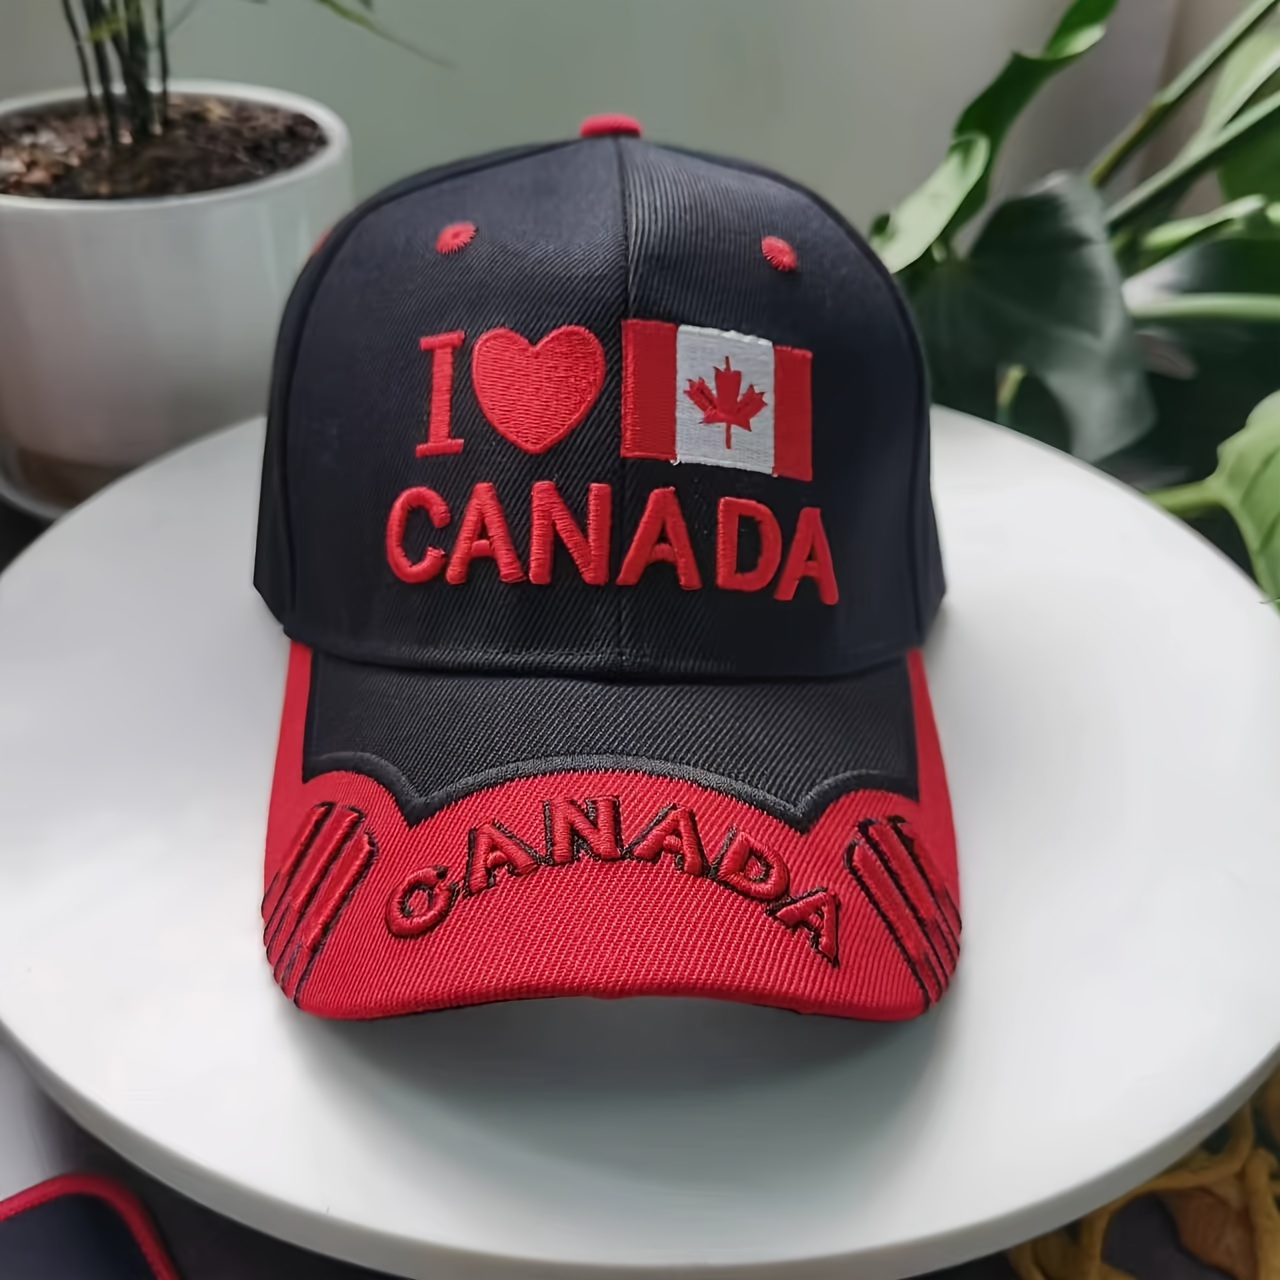 Stylish Spring and Autumn Color-Blocked Baseball Baseball Hat, Dad Hats with Canadian English Maple Leaf Embroidery - Perfect for Daily Wear